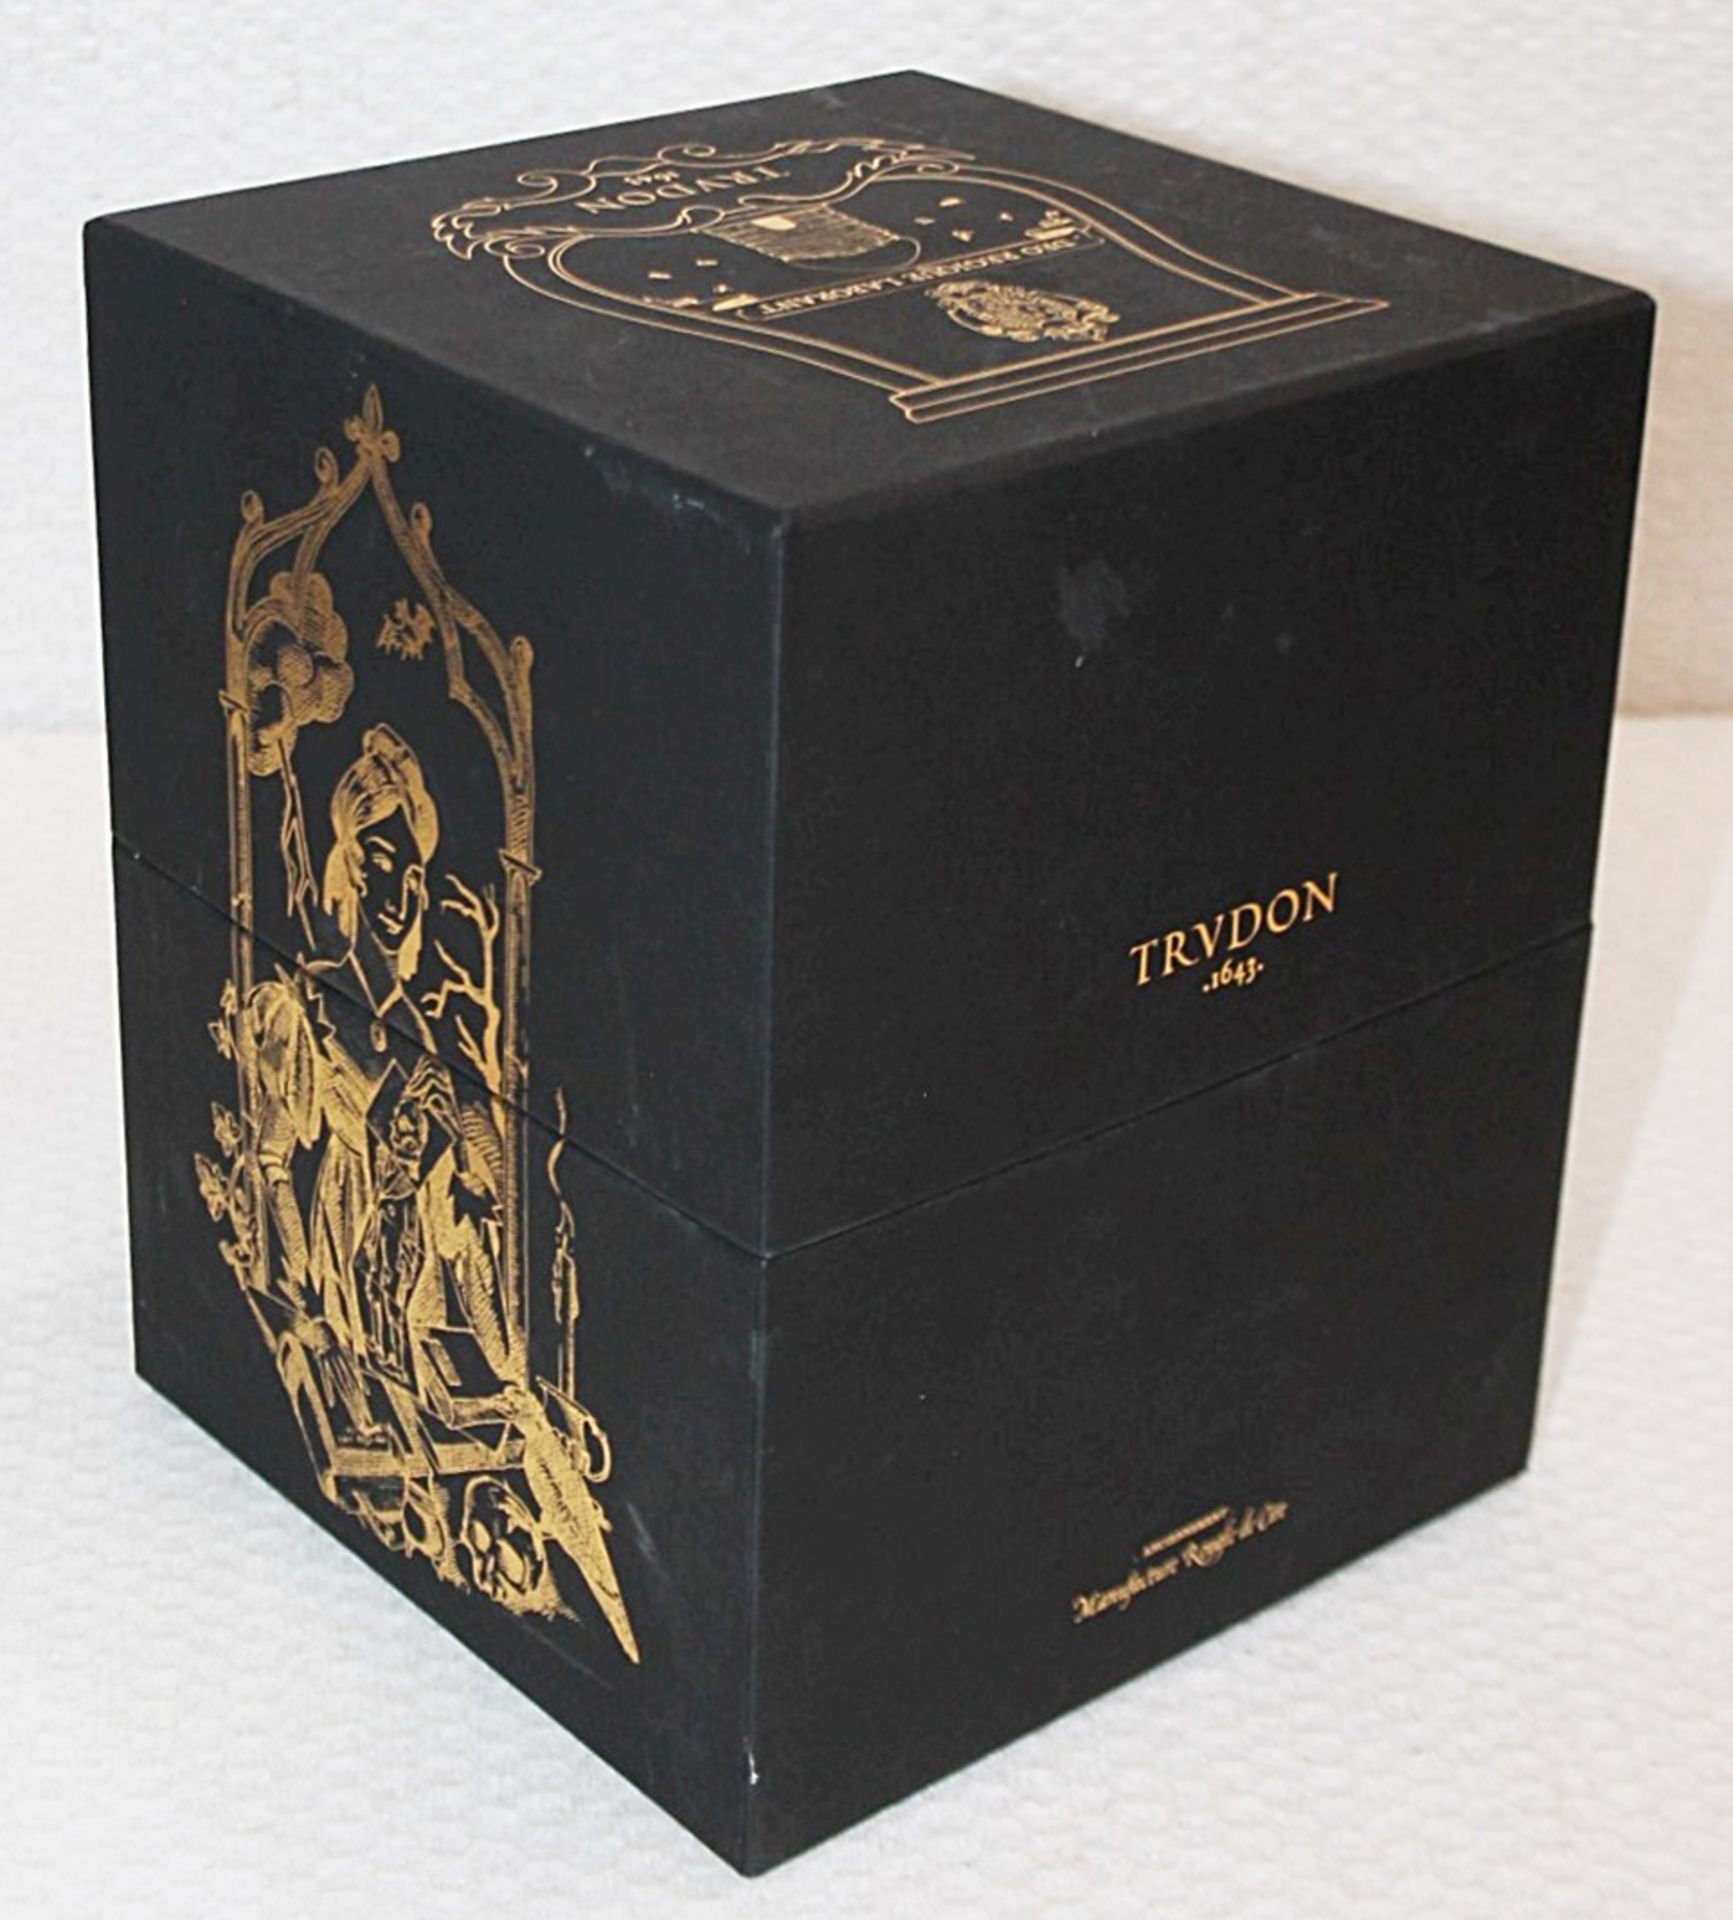 1 x CIRE TRUDON Limited Edition 'Mary' Great Candle (2.8kg) - Original Price £495.00 - Unused - Image 6 of 10